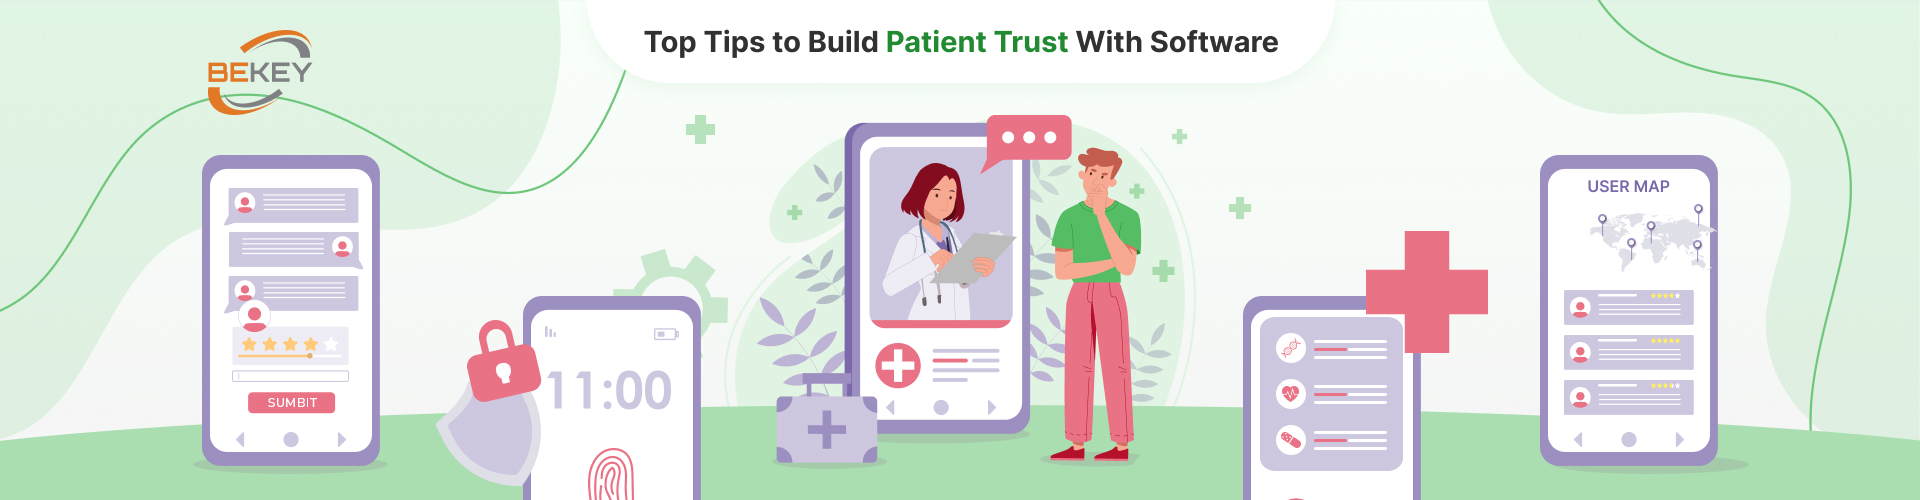 Top Tips to Build Patient Trust With Software - image